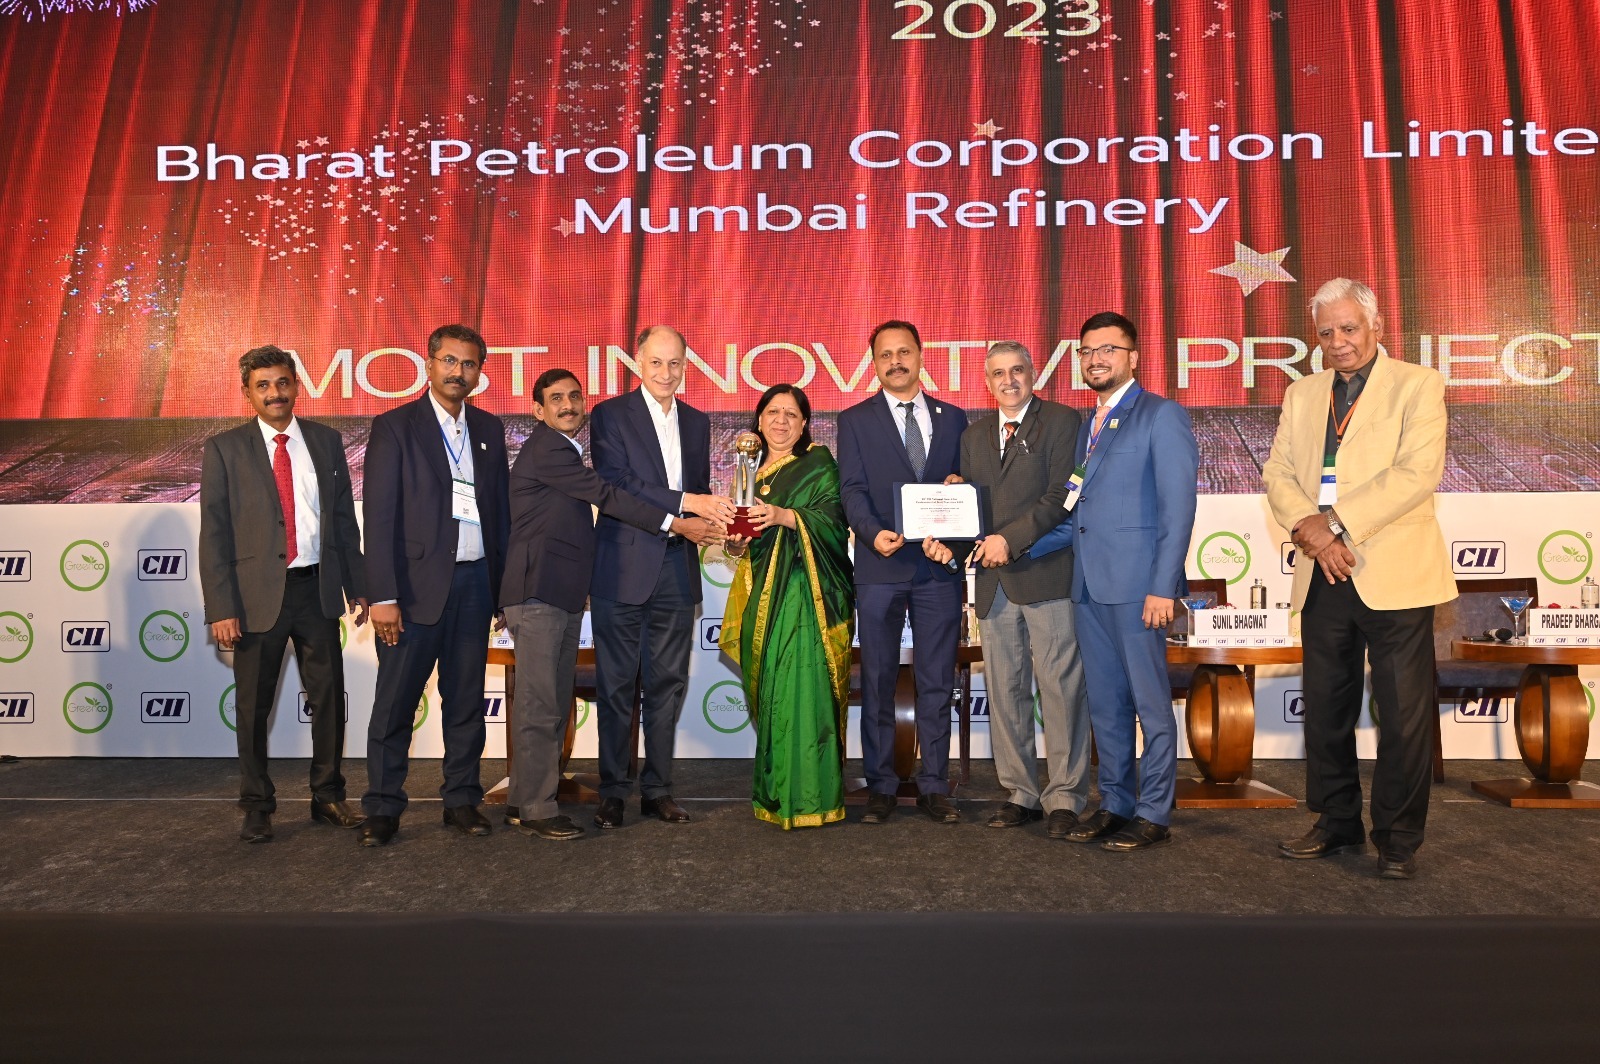 BPCL received the "CII National Award for Environmental Best Practices 2023"